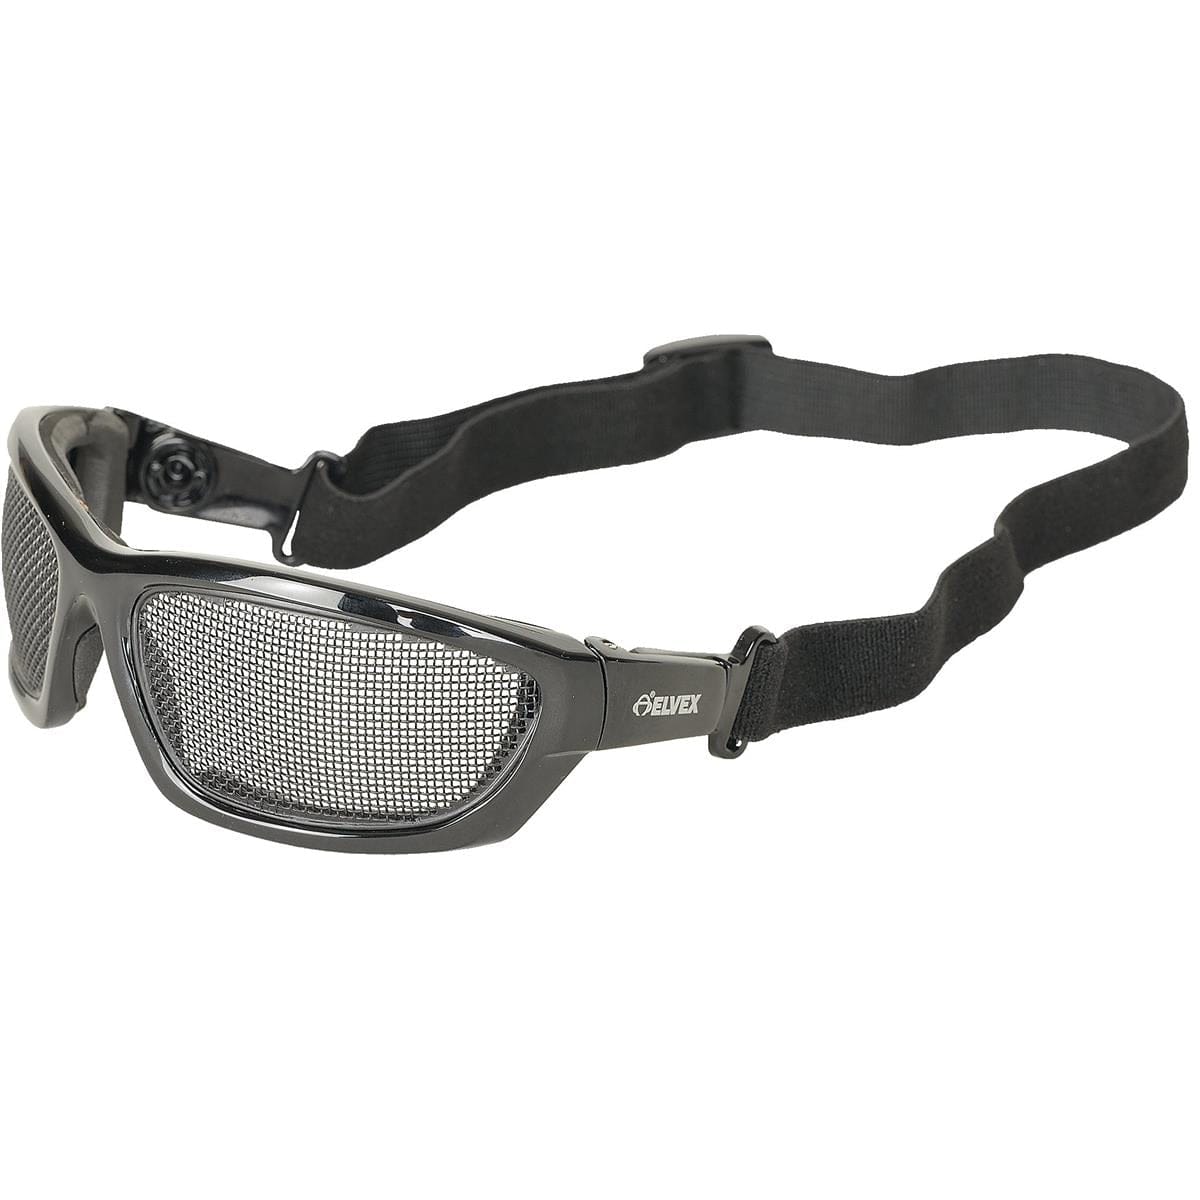 AirSpecs™ Steel Mesh Chain Saw Goggles